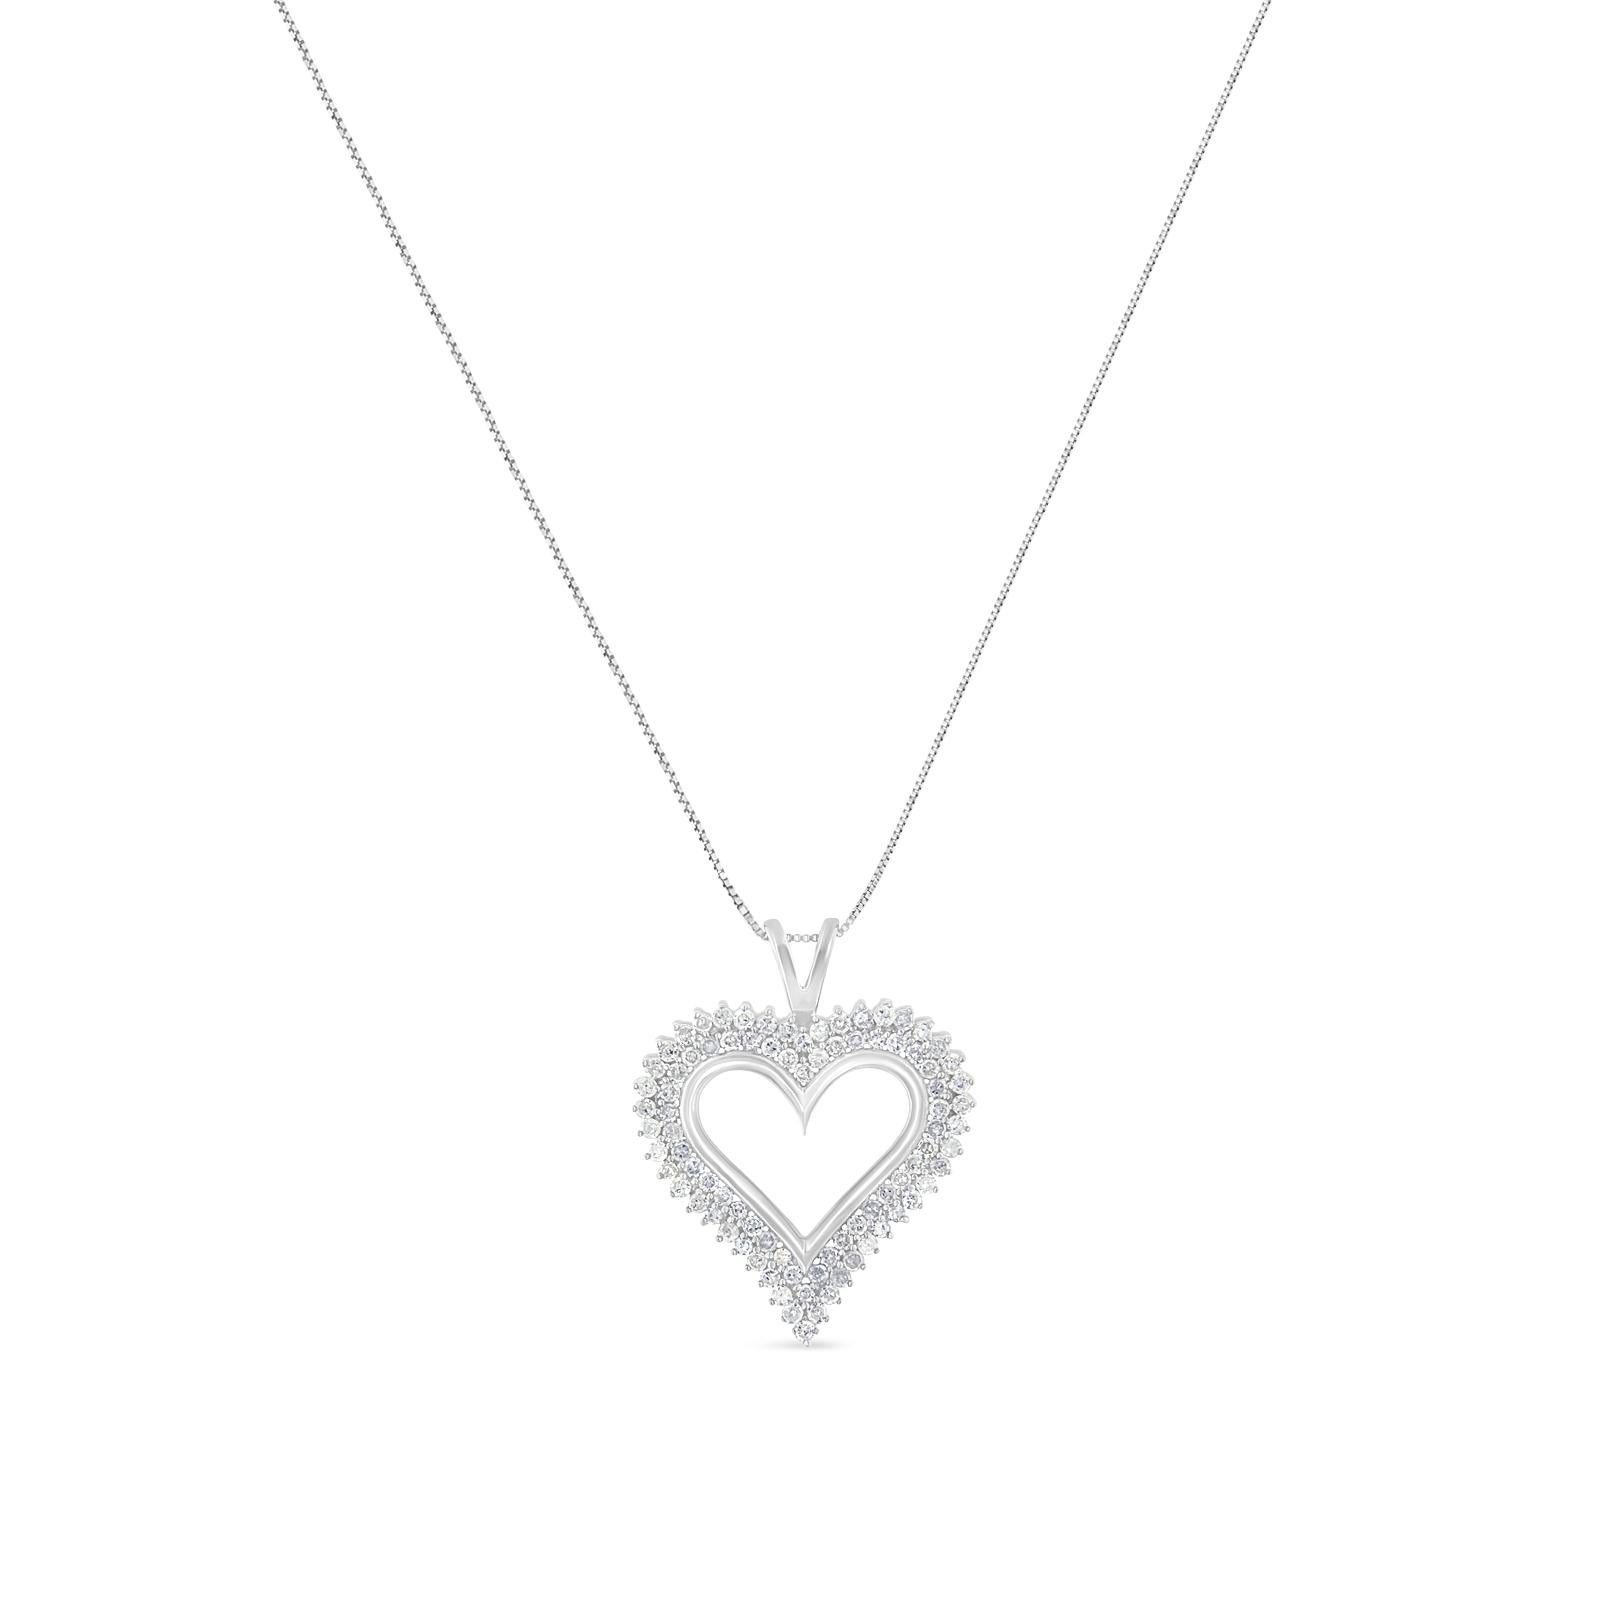 Celebrate someone you love with this stunning diamond pendant. This diamond necklace features 2 rows of round diamonds prong set along the edge of this open heart shape crafted of stunning sterling silver, with a matching box chain necklace. Both